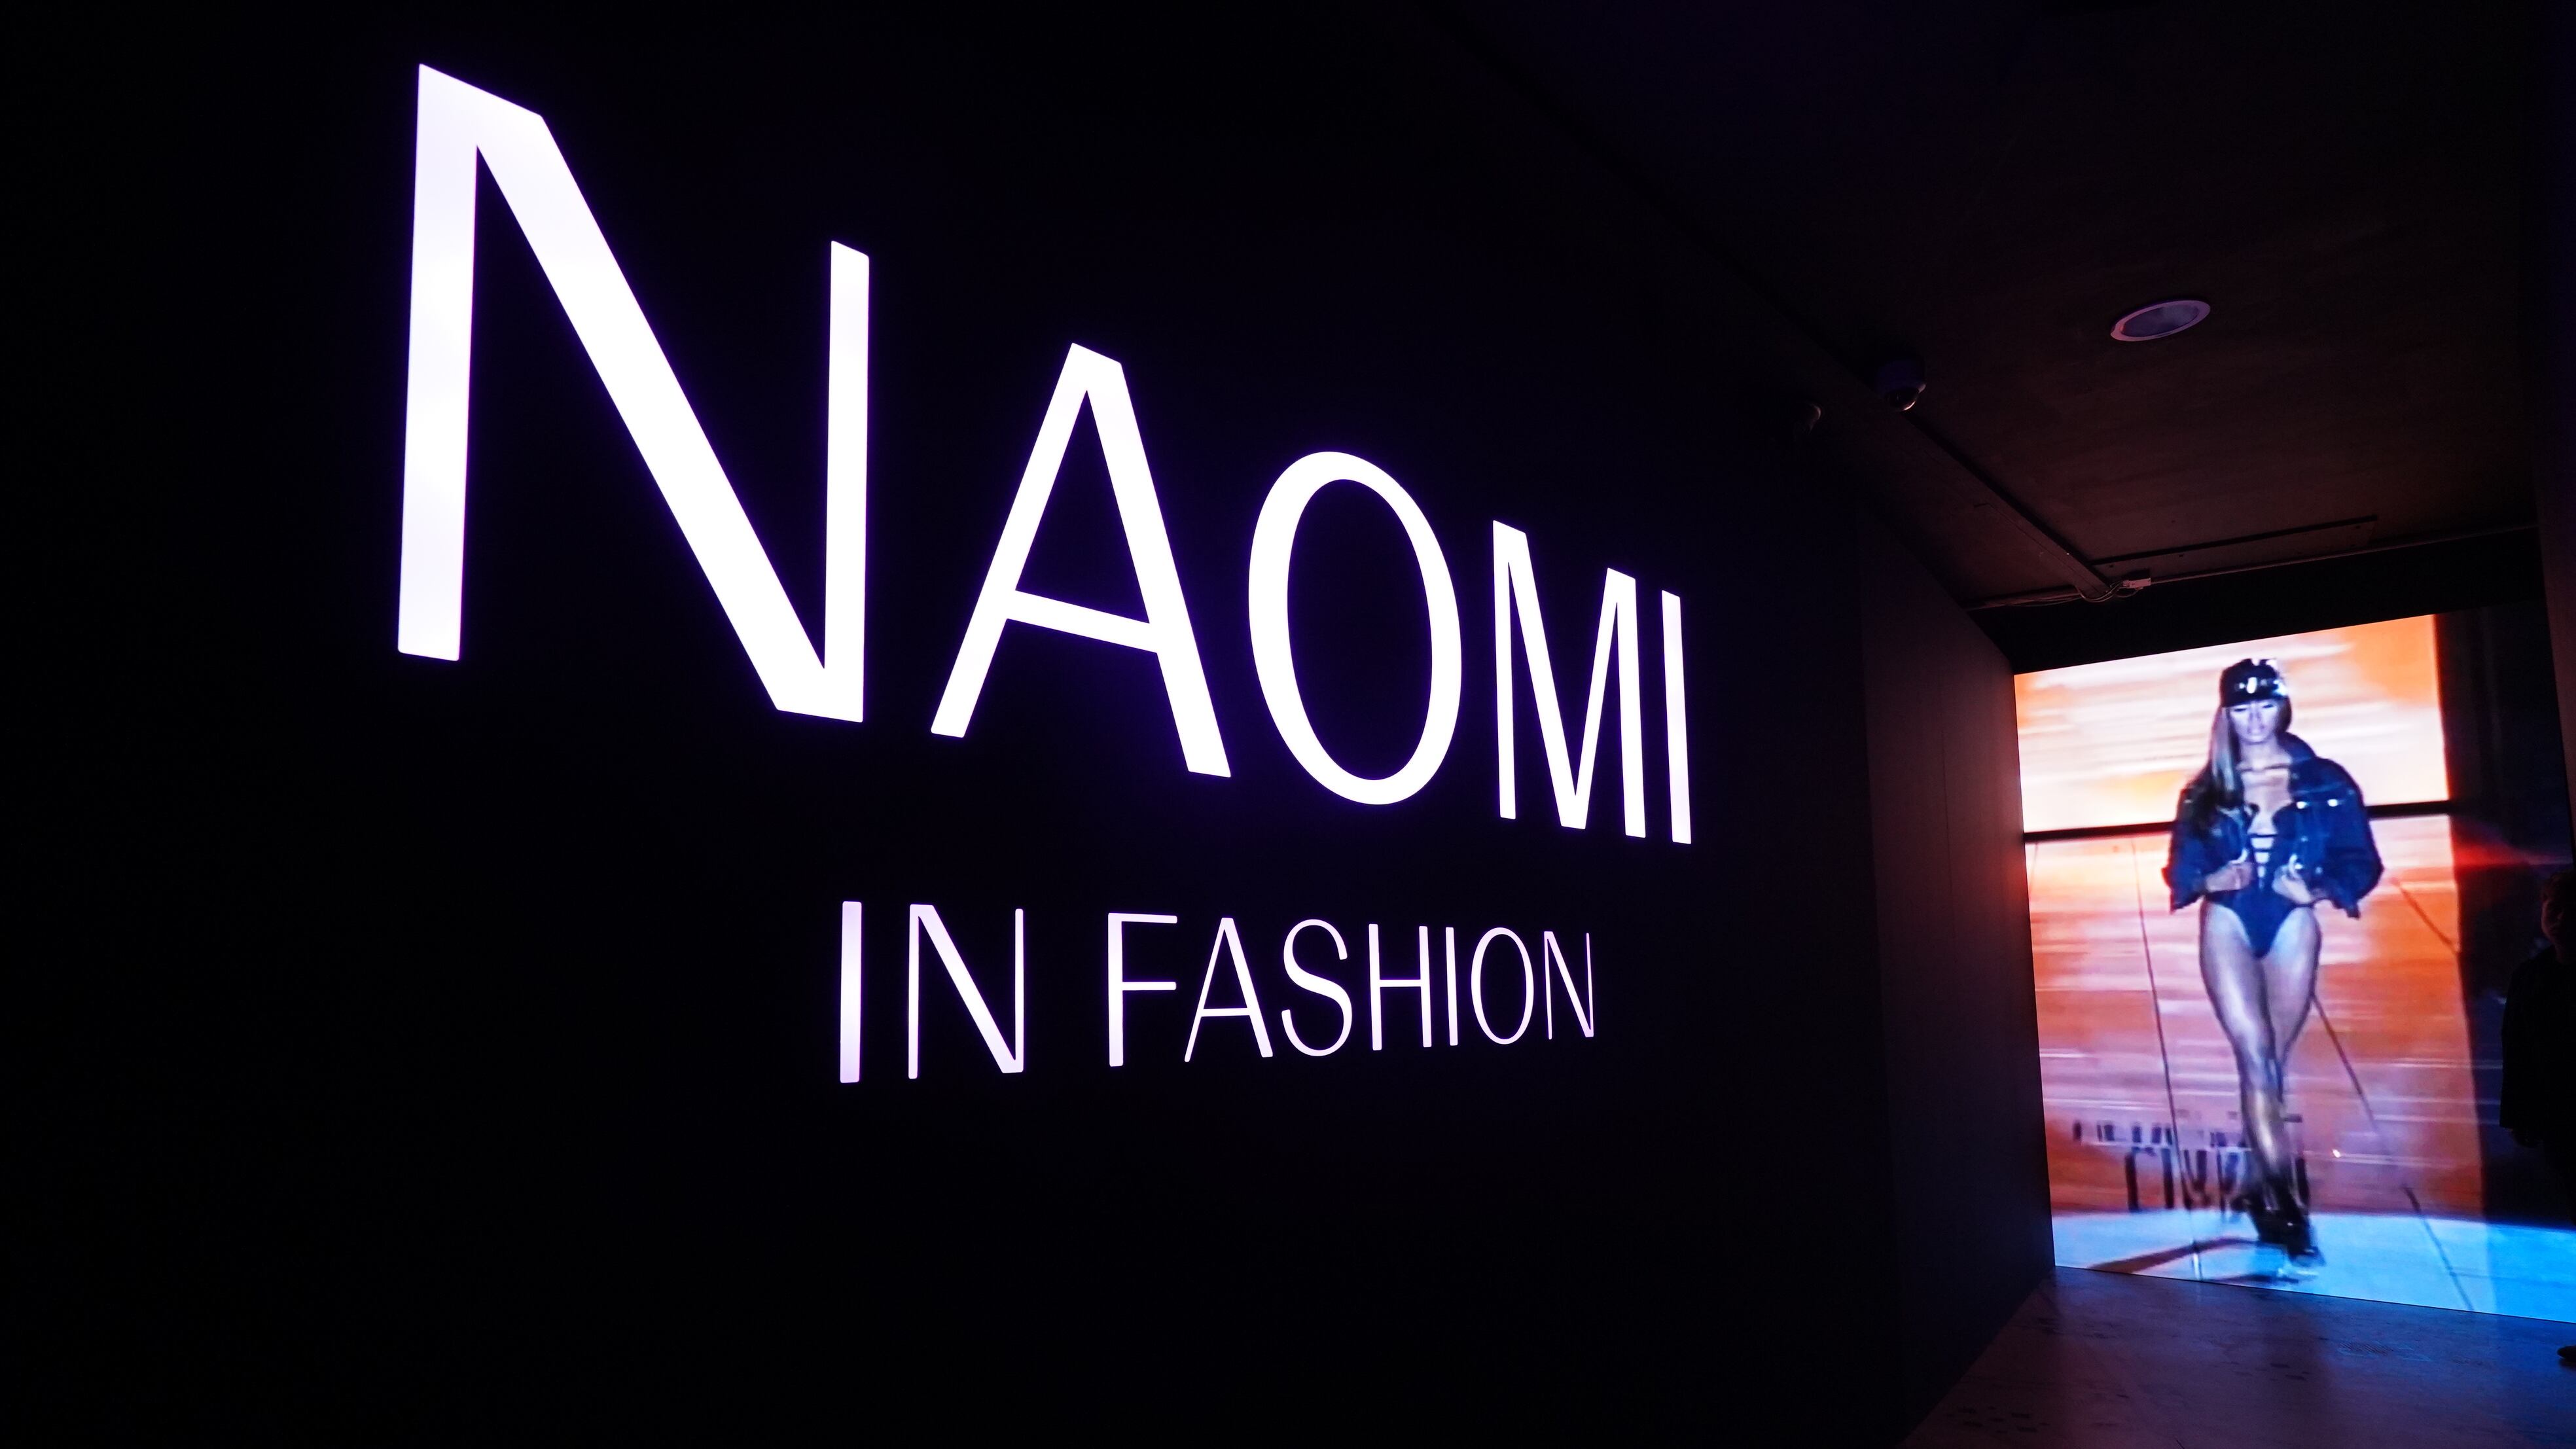 The Naomi In Fashion exhibition will launch on Saturday, June 22, at London’s V&A Museum